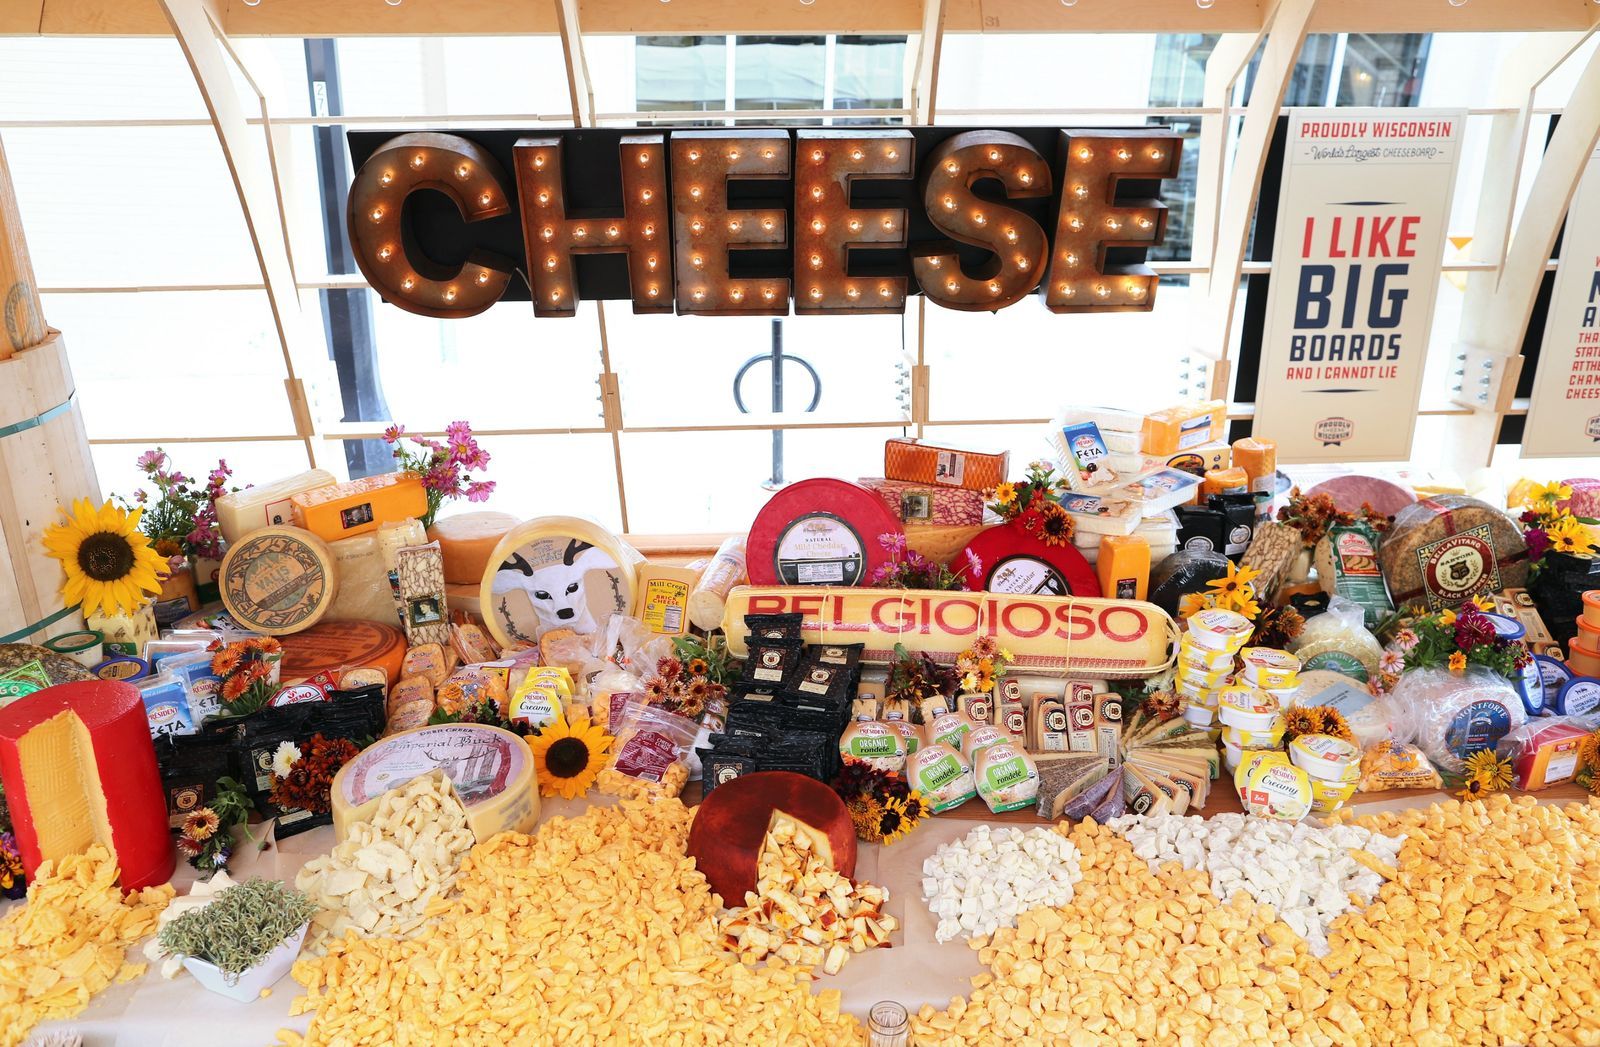 World's Largest Cheeseboard: world record set in Madison, Wisconsin